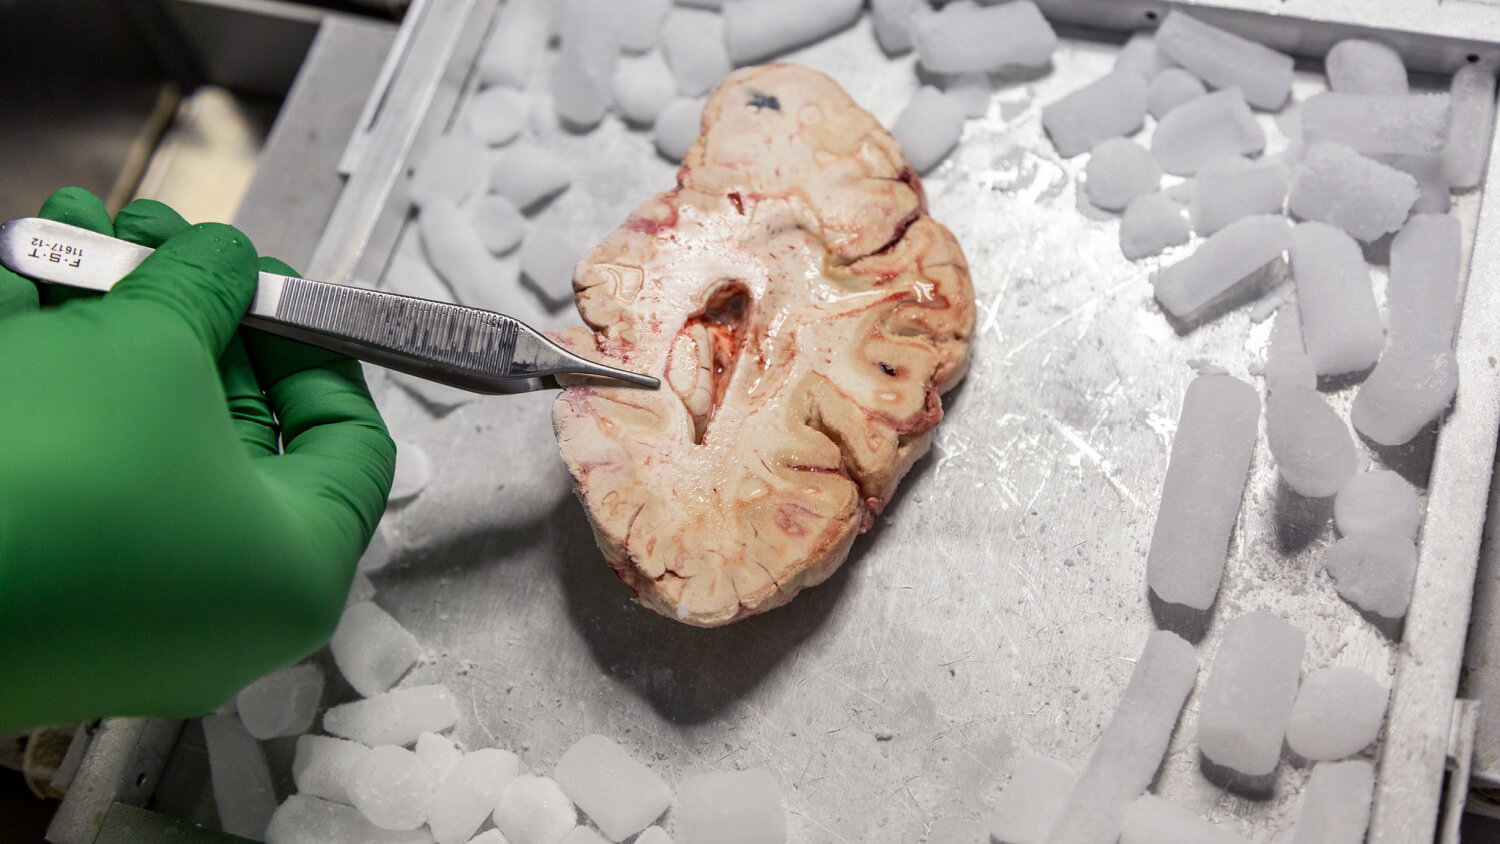 Rebecca Hodge, Ph.D., a scientist at the Allen Institute for Brain Science, holds a frozen slice of a postmortem human brain donated to research. A new effort led by the Allen Institute aims to map the entire human brain at single-cell resolution. Photo by Erik Dinnel / Allen Institute